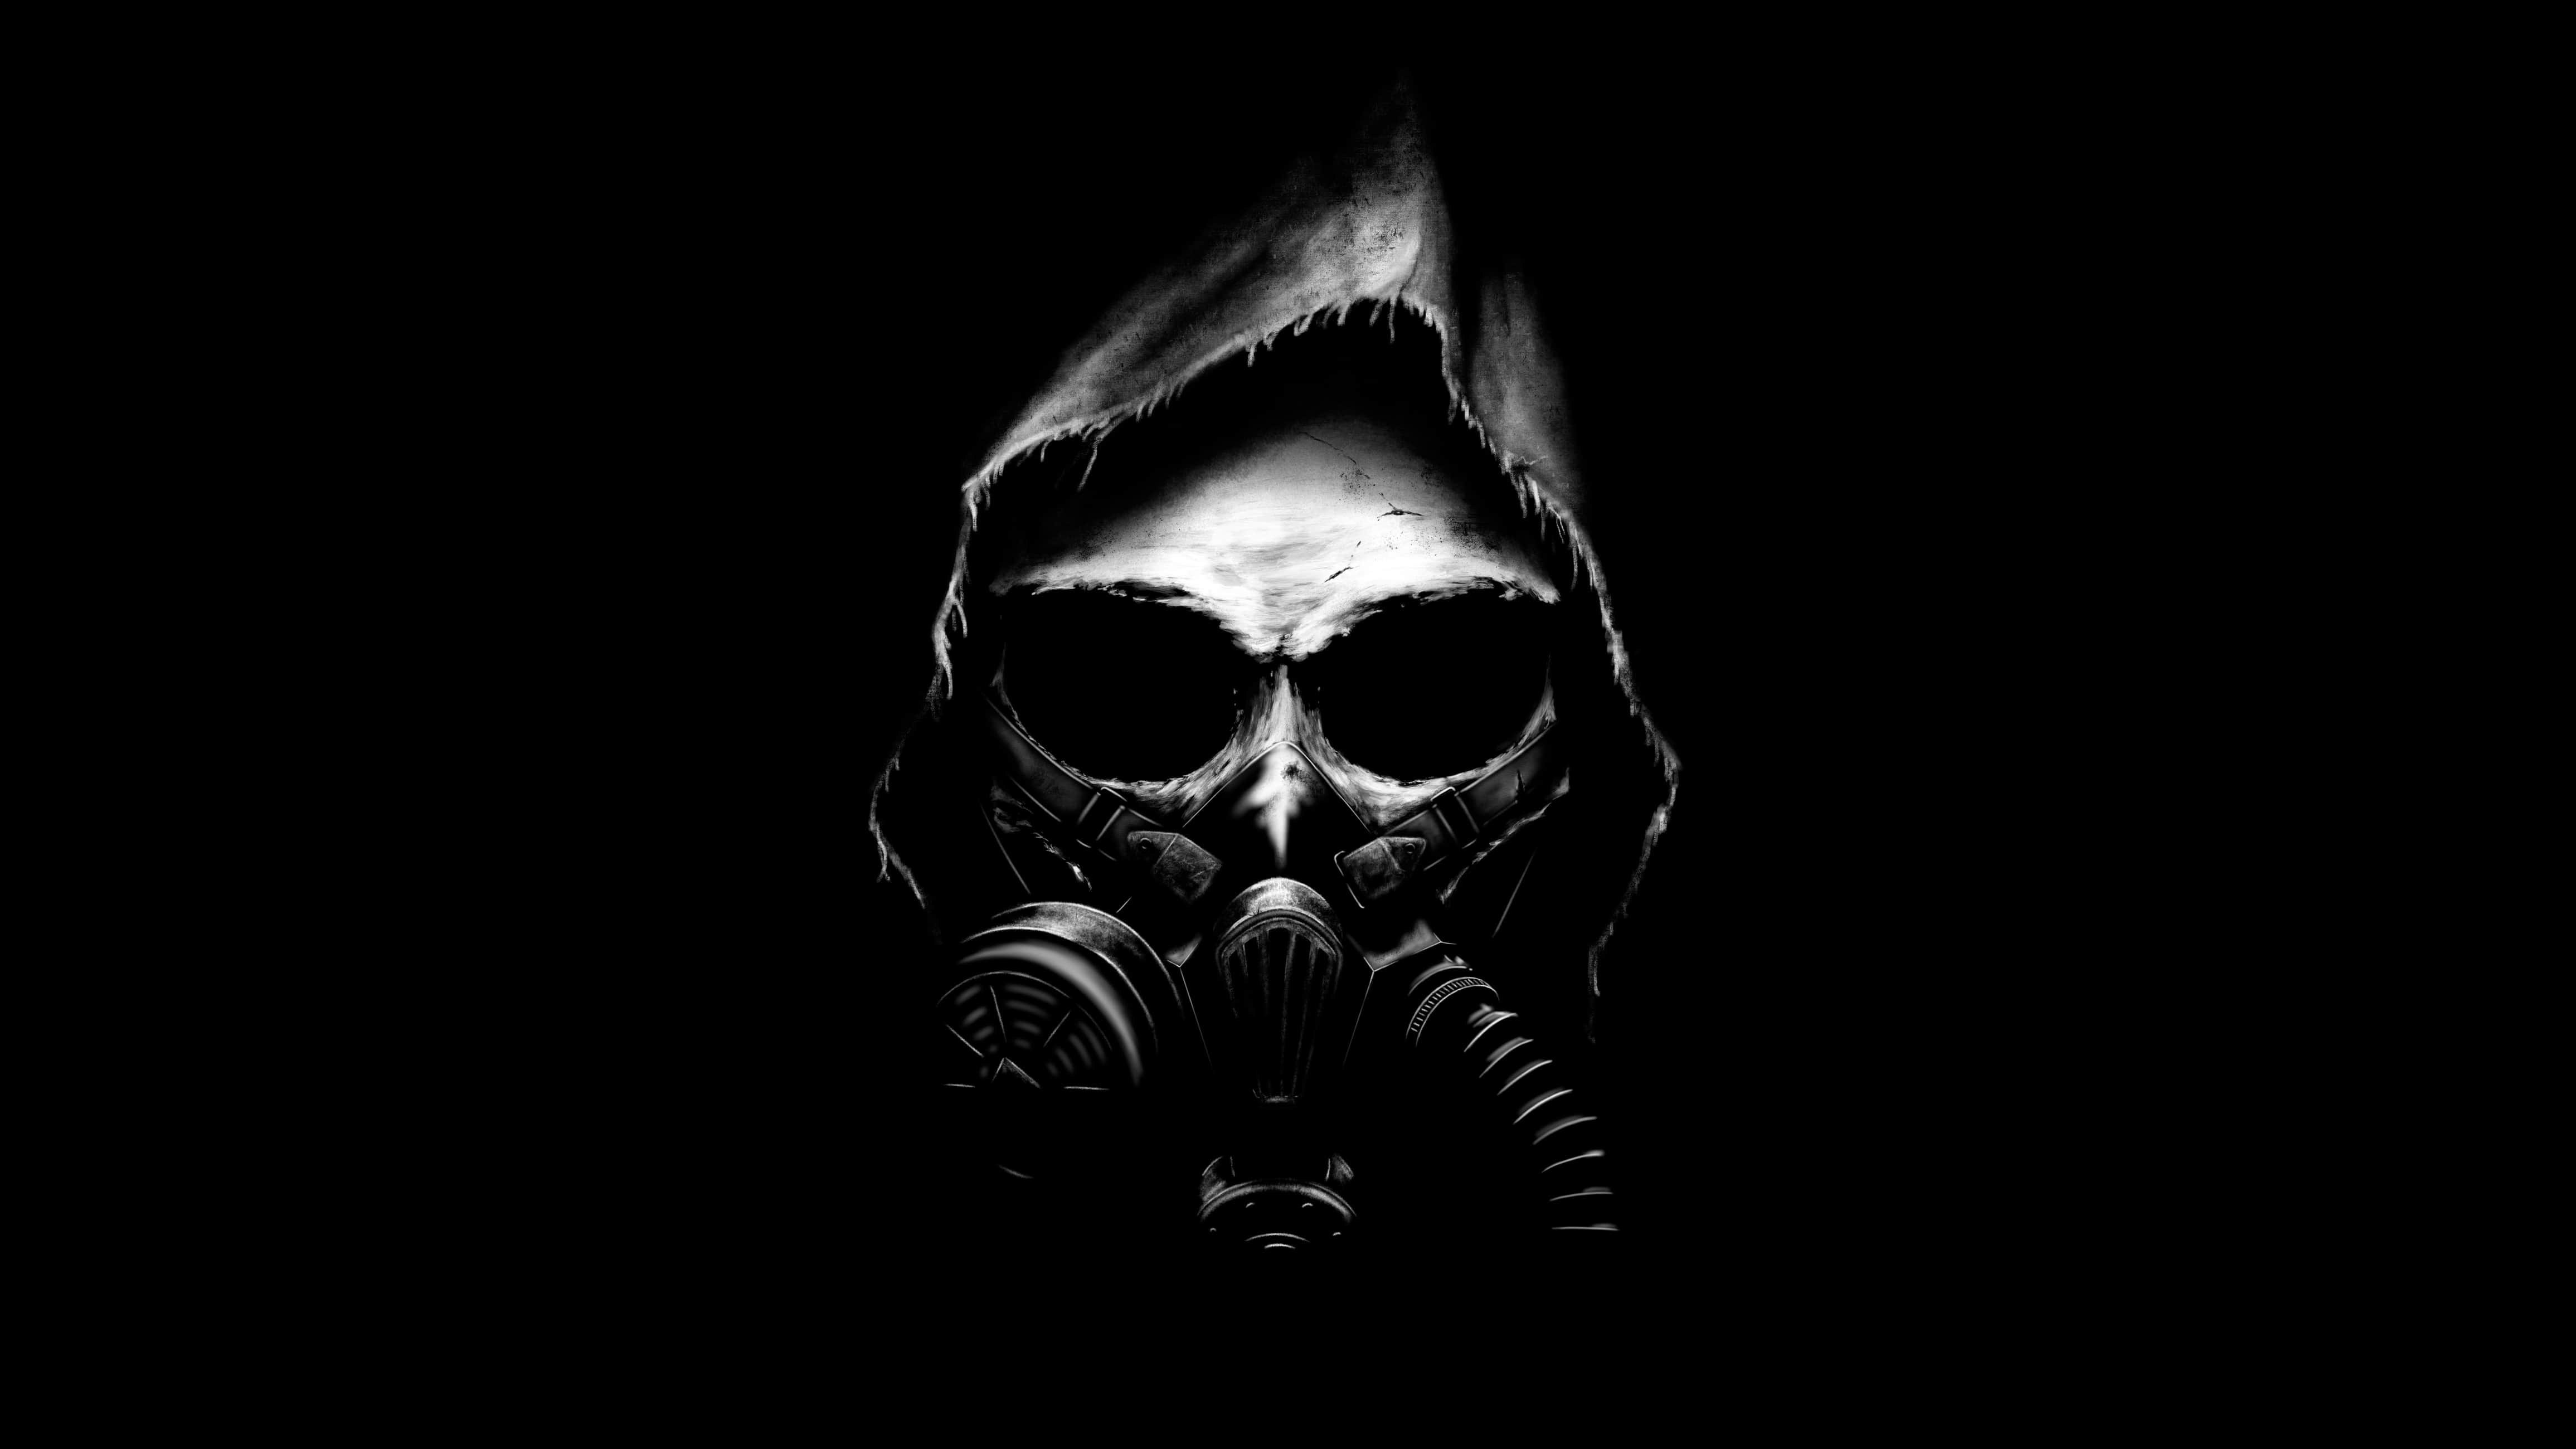 Apocalyptic Skull 4k Backgrounds 4082 Wallpapers and Free Stock